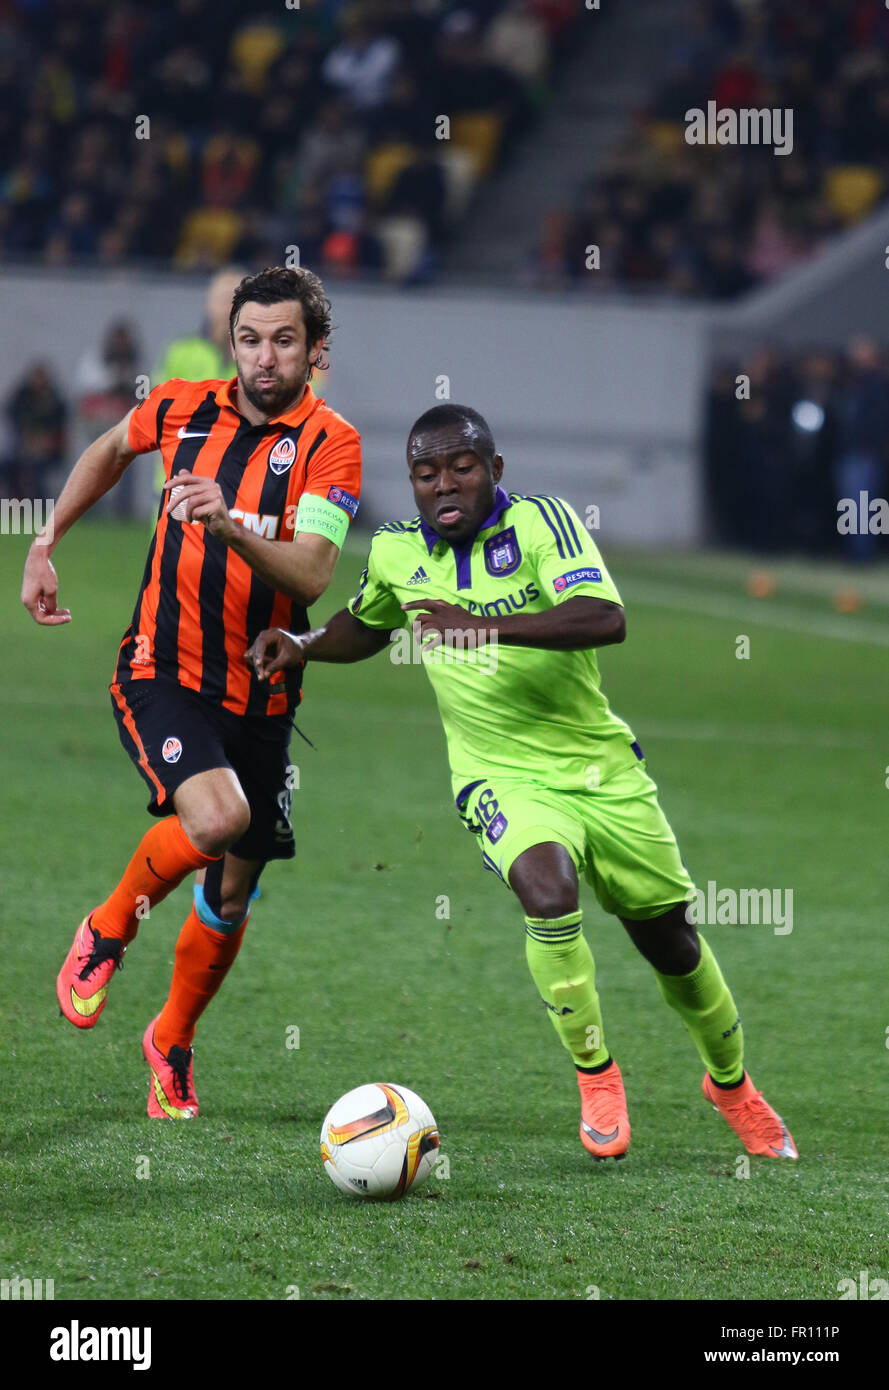 LVIV, UKRAINE - March 10, 2016: Darijo Srna of FC Shakhtar Donetsk (L) fights for a ball with Frank Acheampong of RSC Anderlecht Stock Photo